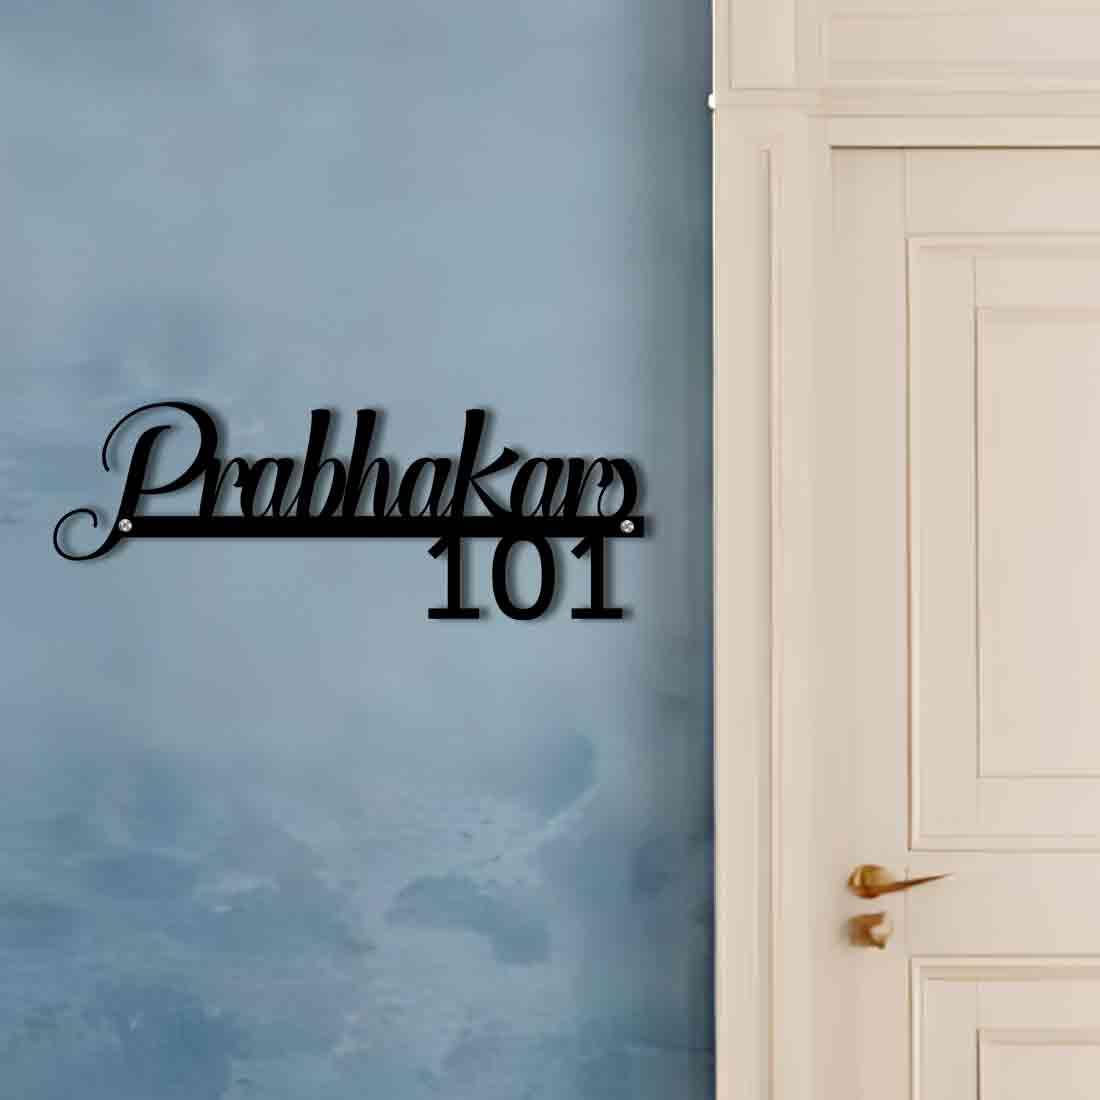 Laser Cut Name Plate - Stainless Steel Cut Out Nameplate for Home